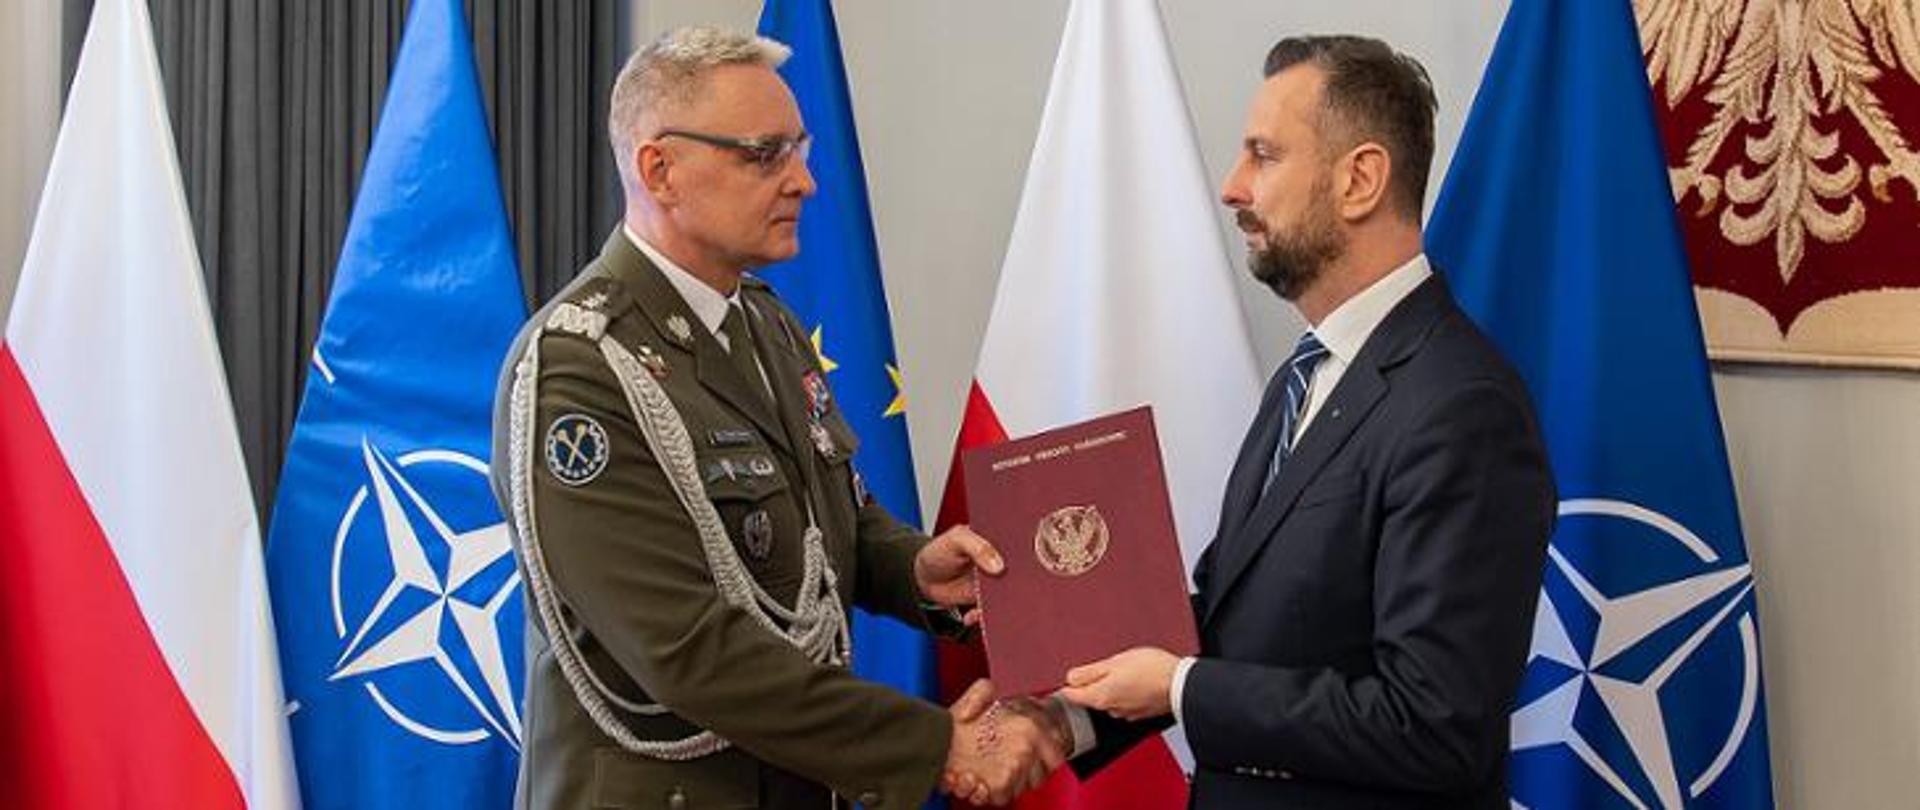 Deputy prime minister and minister of defence Władysław Kosiniak – Kamysz appointed gen. Piotr Błazeusz, the first deputy of the Polish General Staff Chief, to be the commander of the Eurocorps.